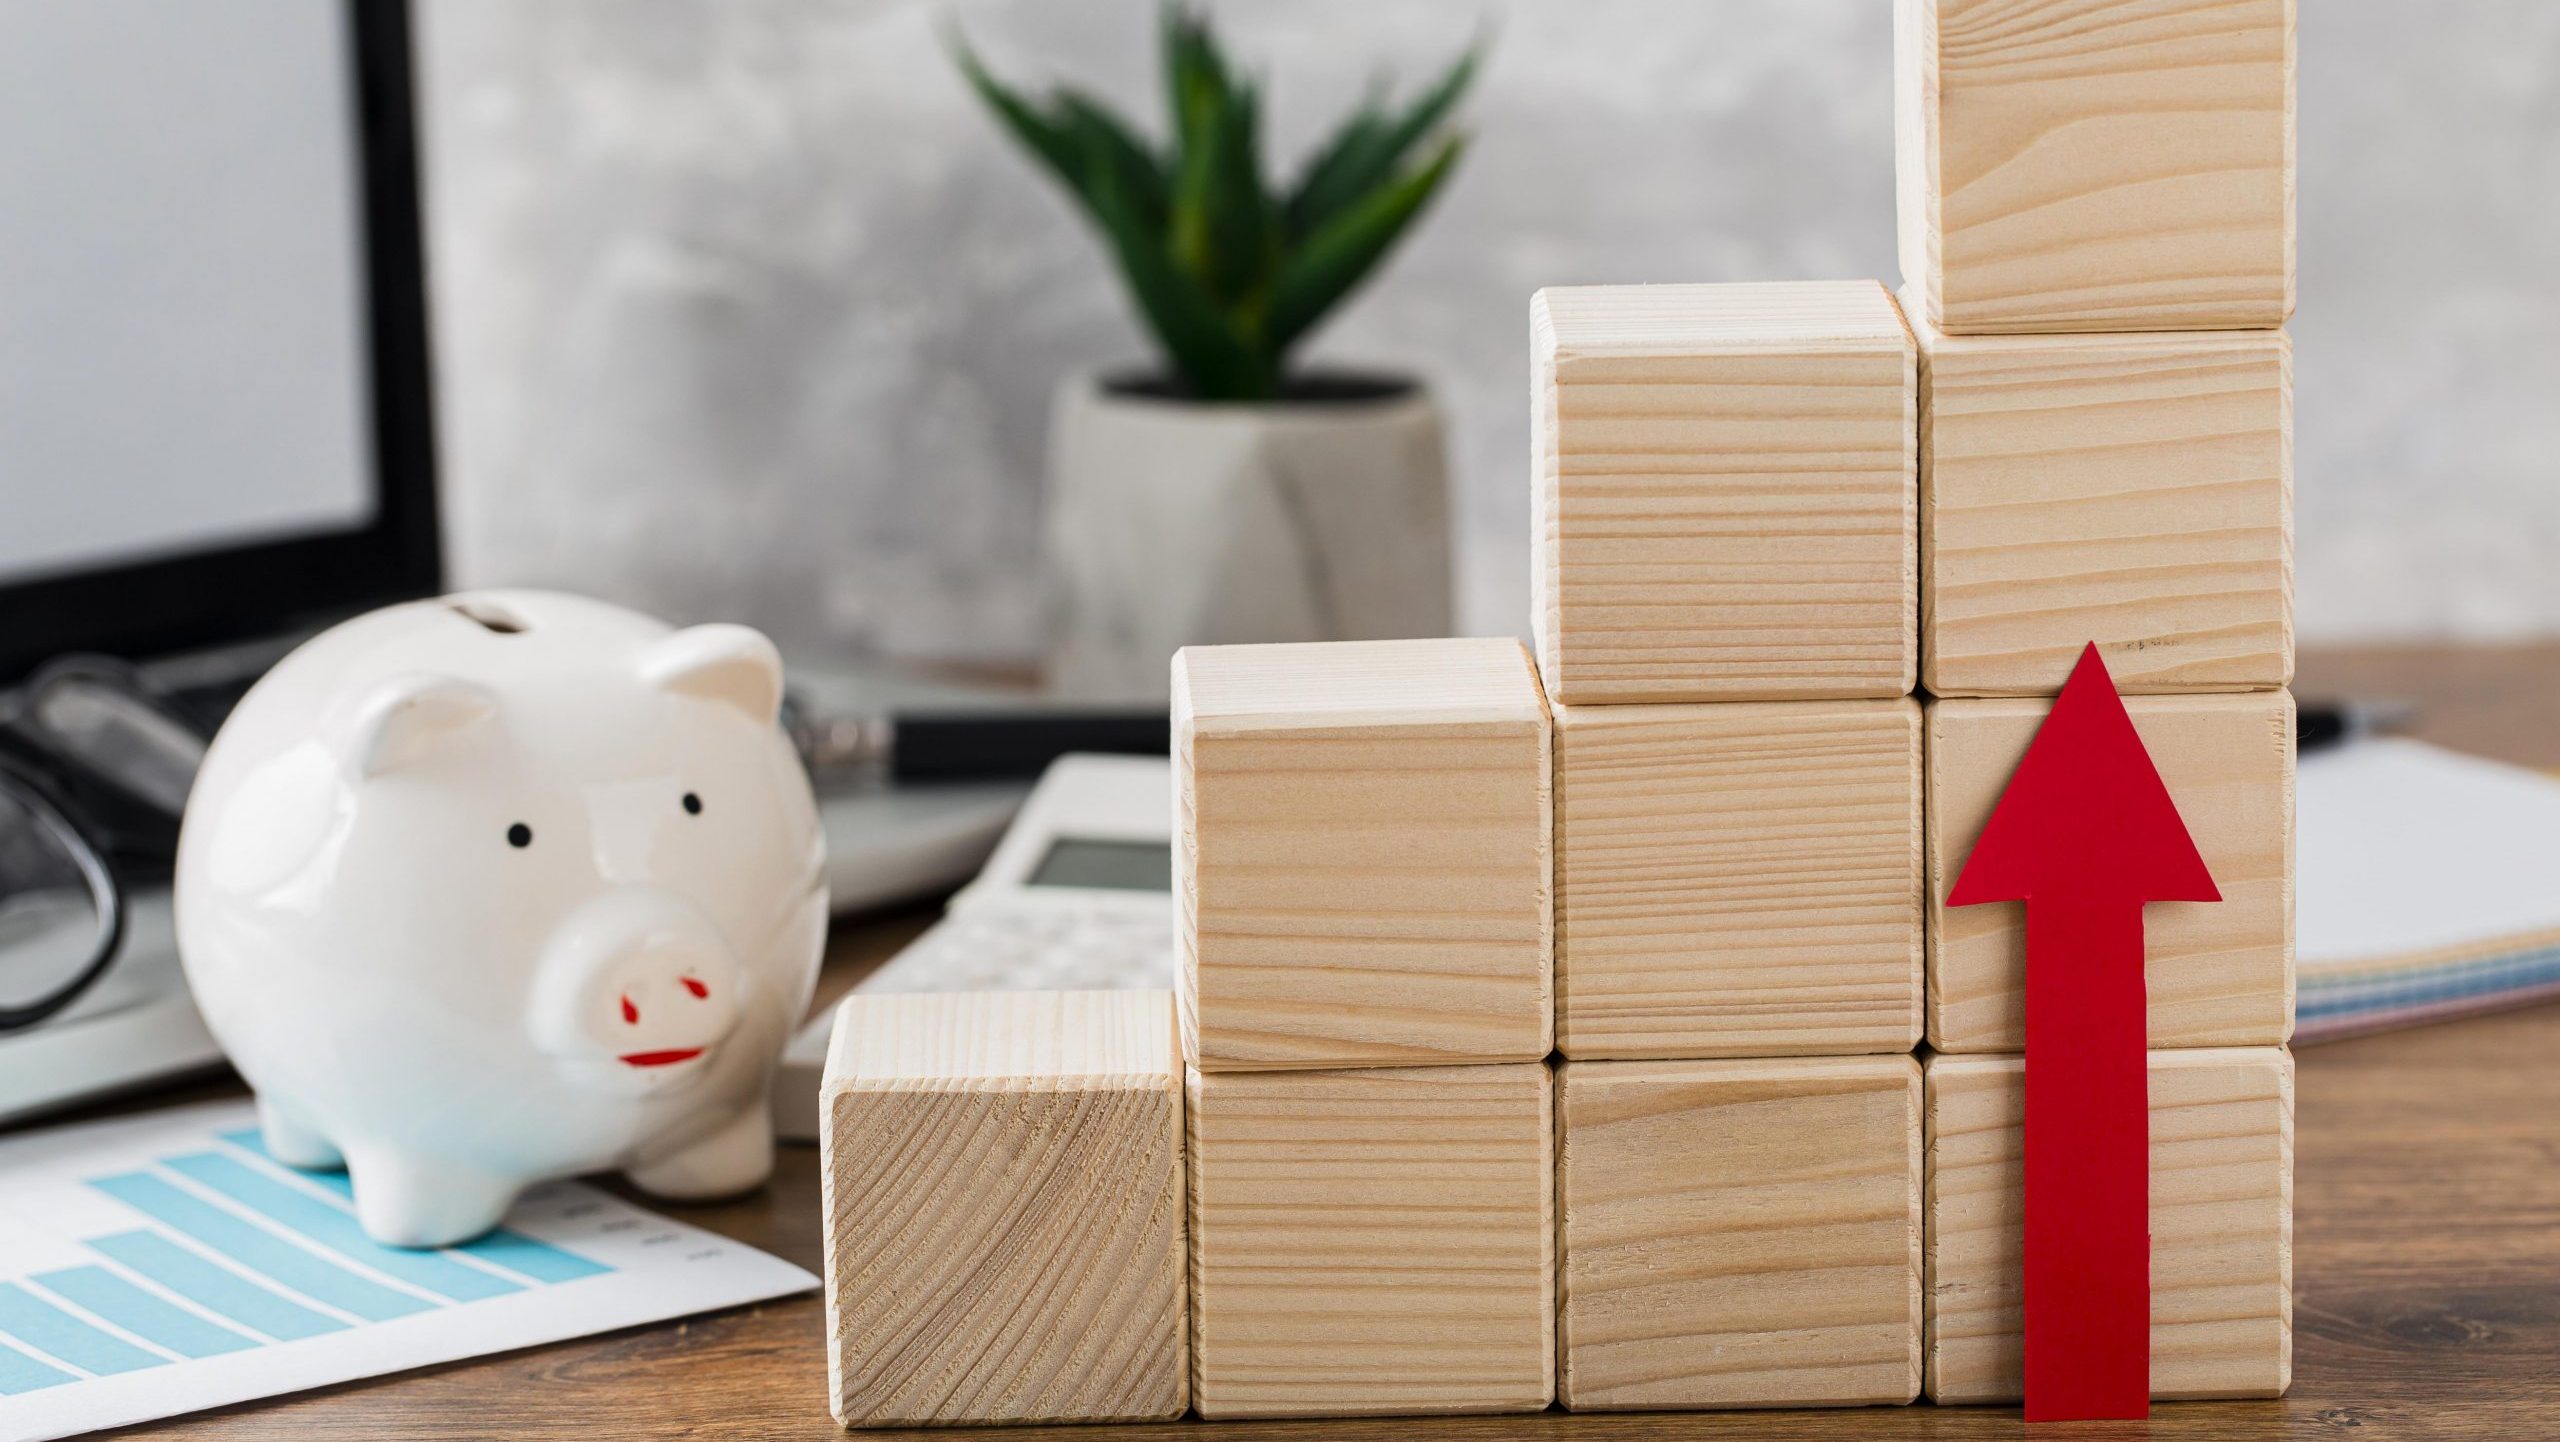 A piggy bank and wooden blocks with red arrow on a table.